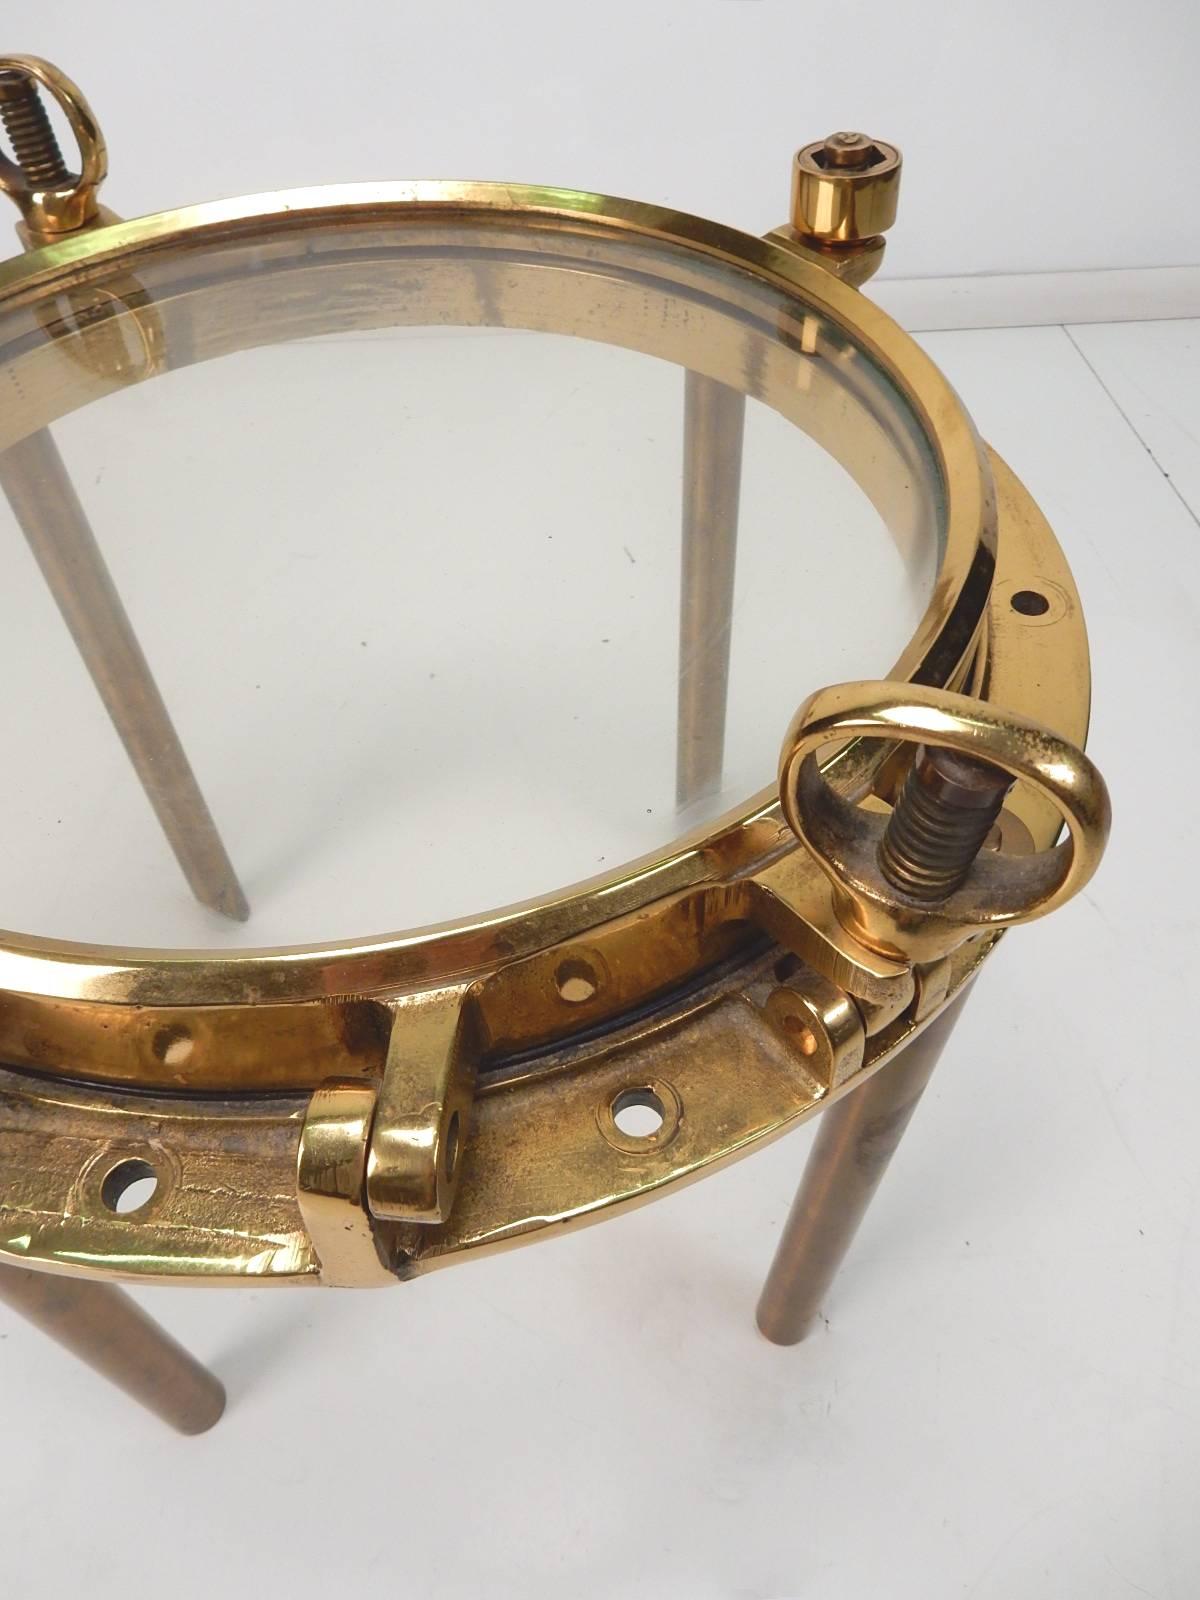 Marriage of a 1920s America brass ship porthole with four solid brass legs making a unique side table for an eclectic décor, circa 1970s.
Very heavy table of solid brass and thick glass.